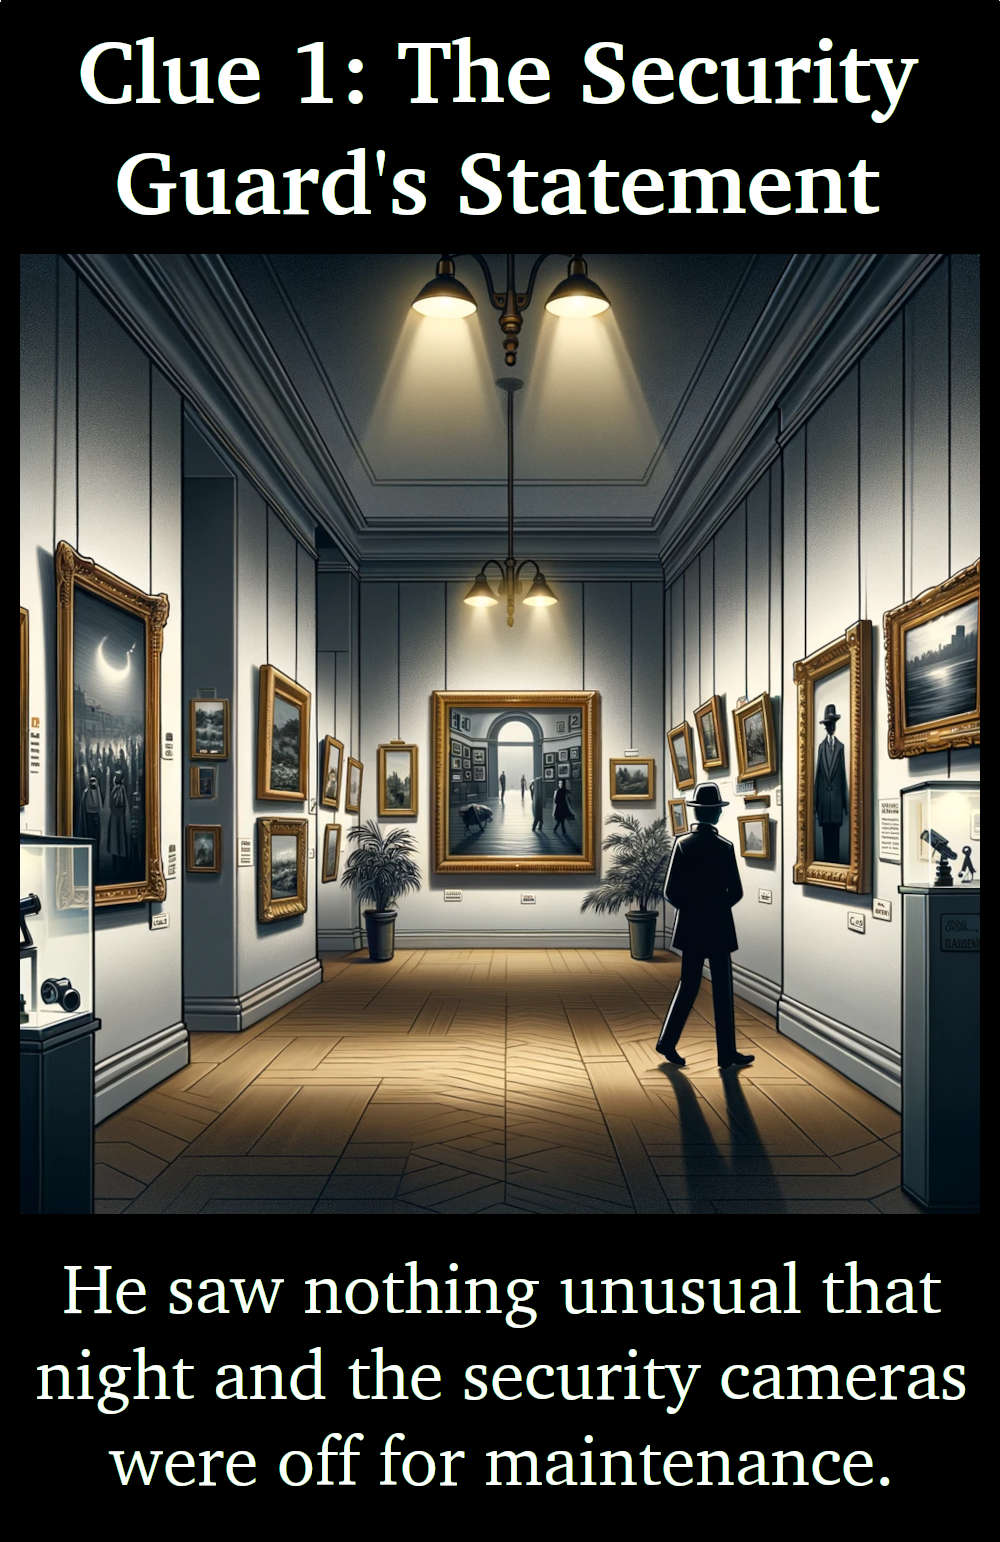 Riddle: The Mysterious Art Heist